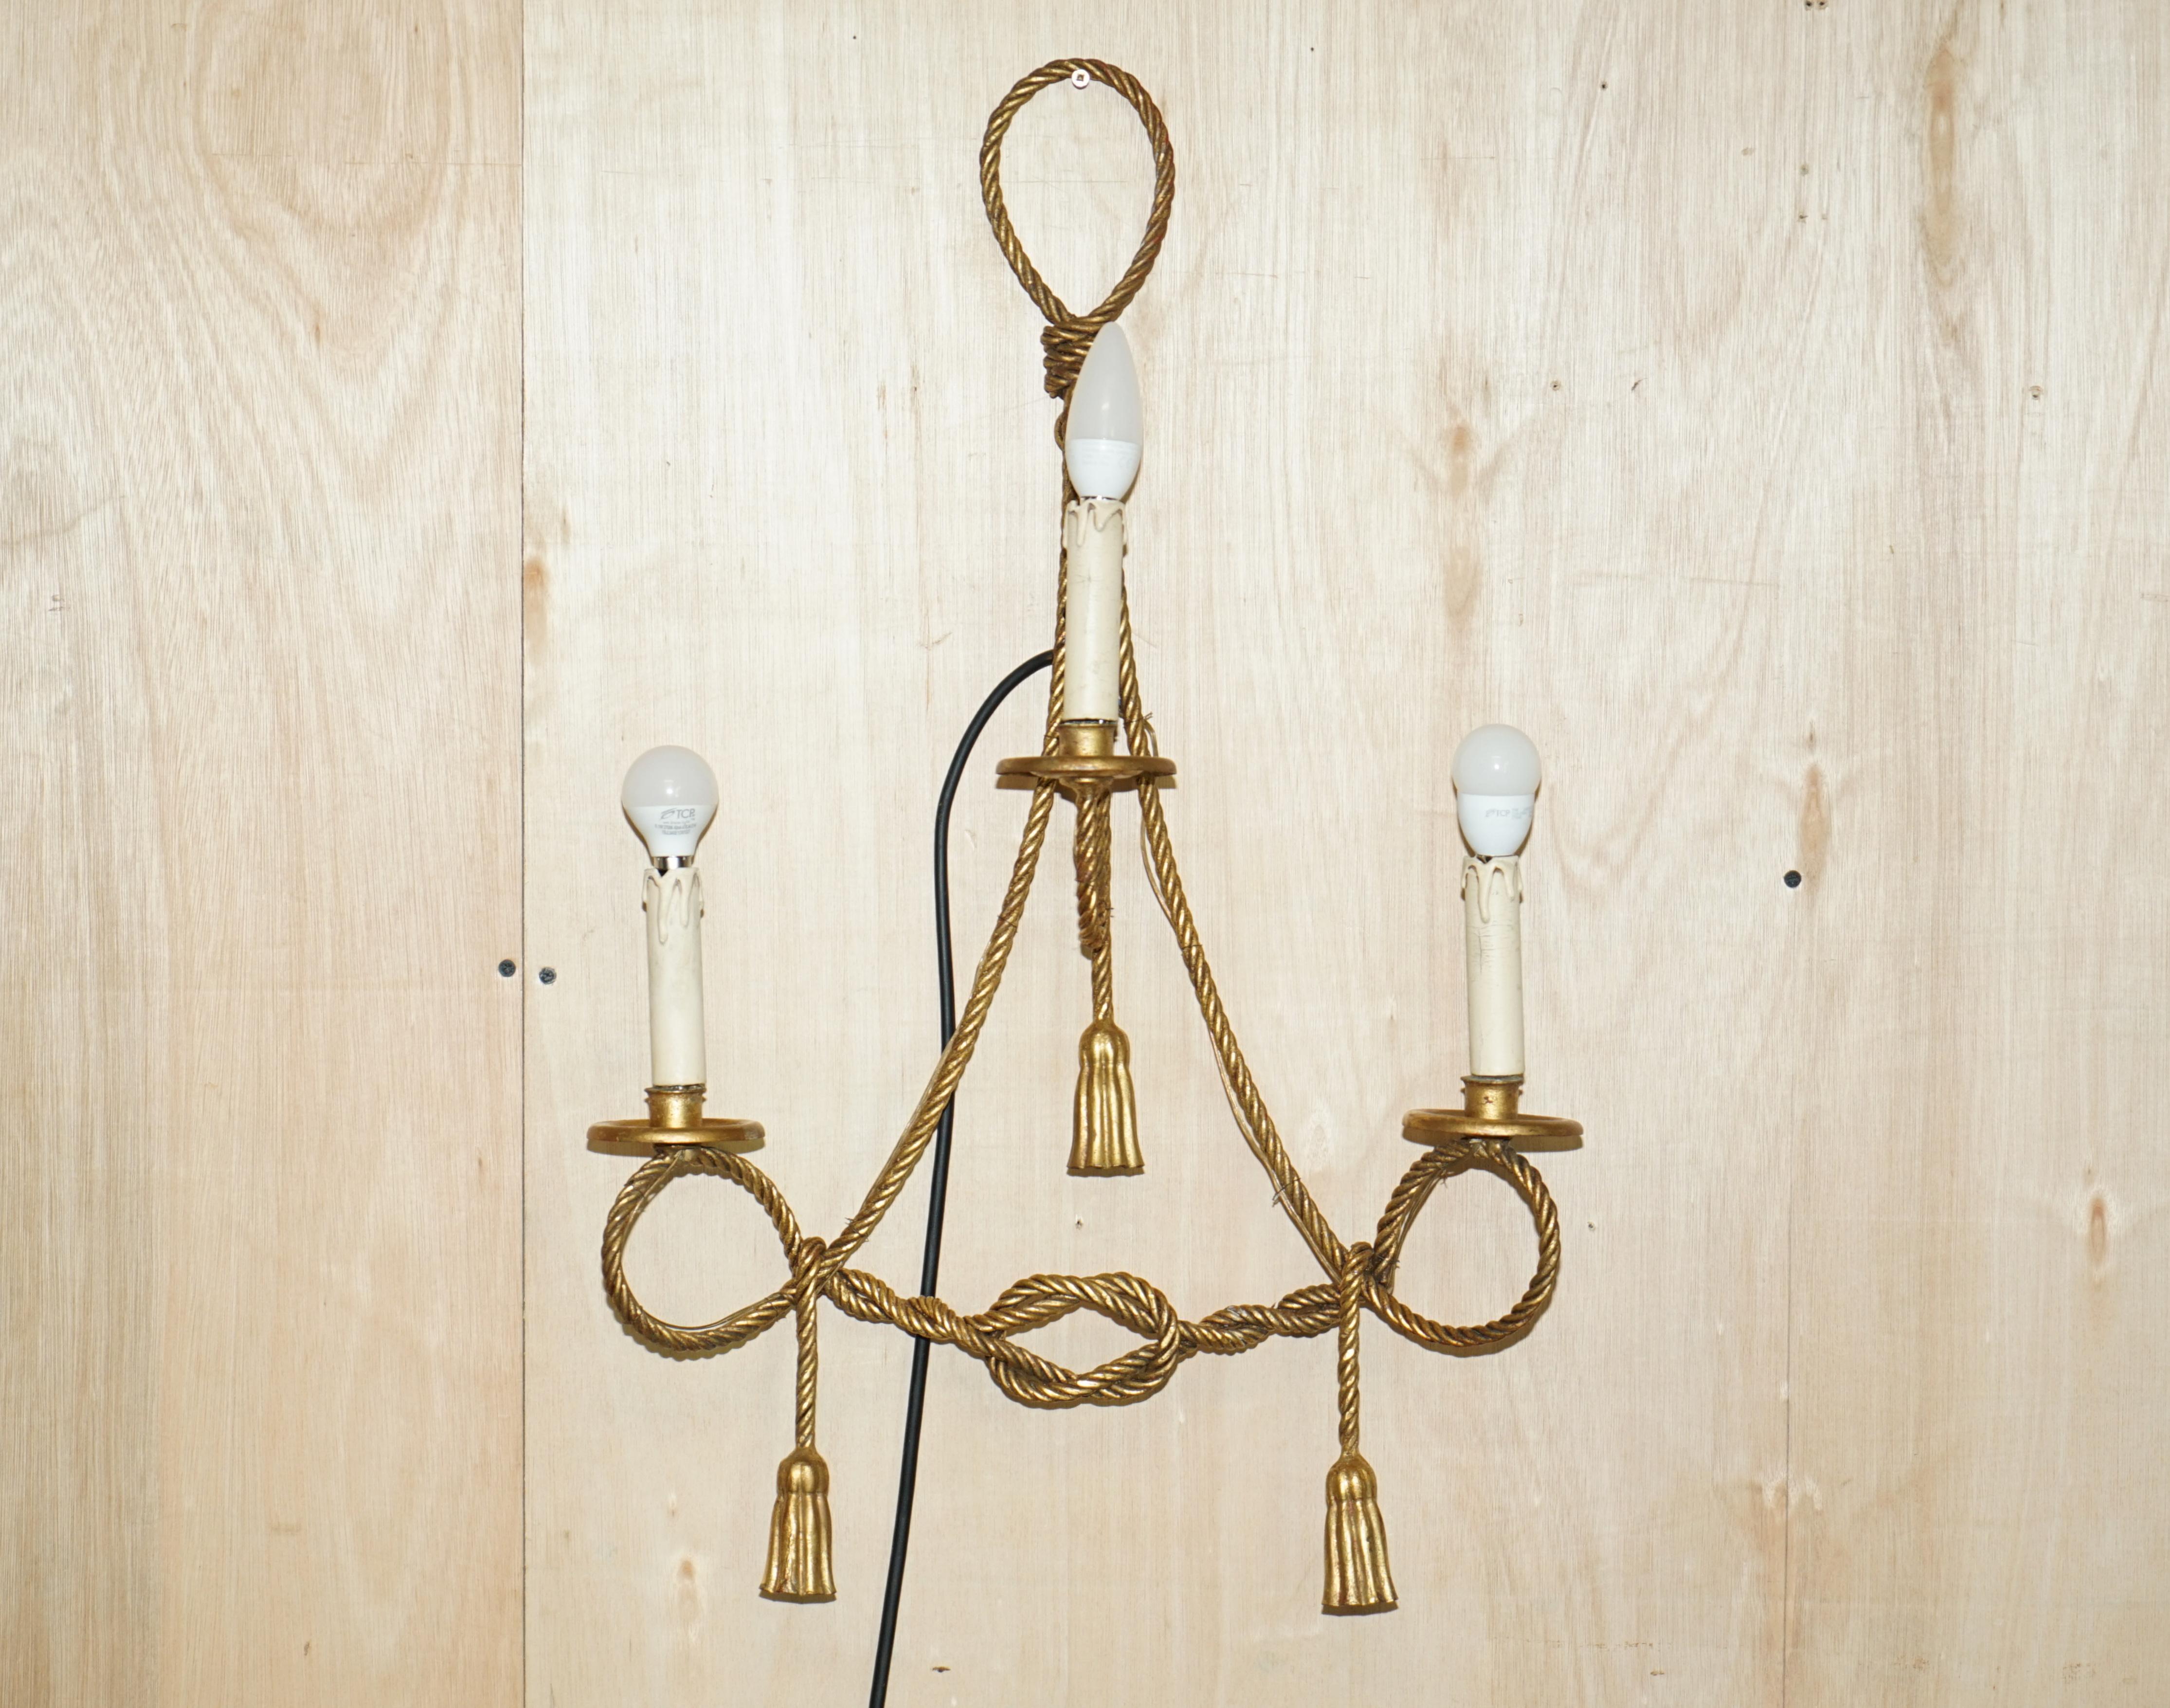 Mid-20th Century Vintage Gold Gilt Rope Twist & Tassle Three Branch Wall Light with Candle Mounts For Sale